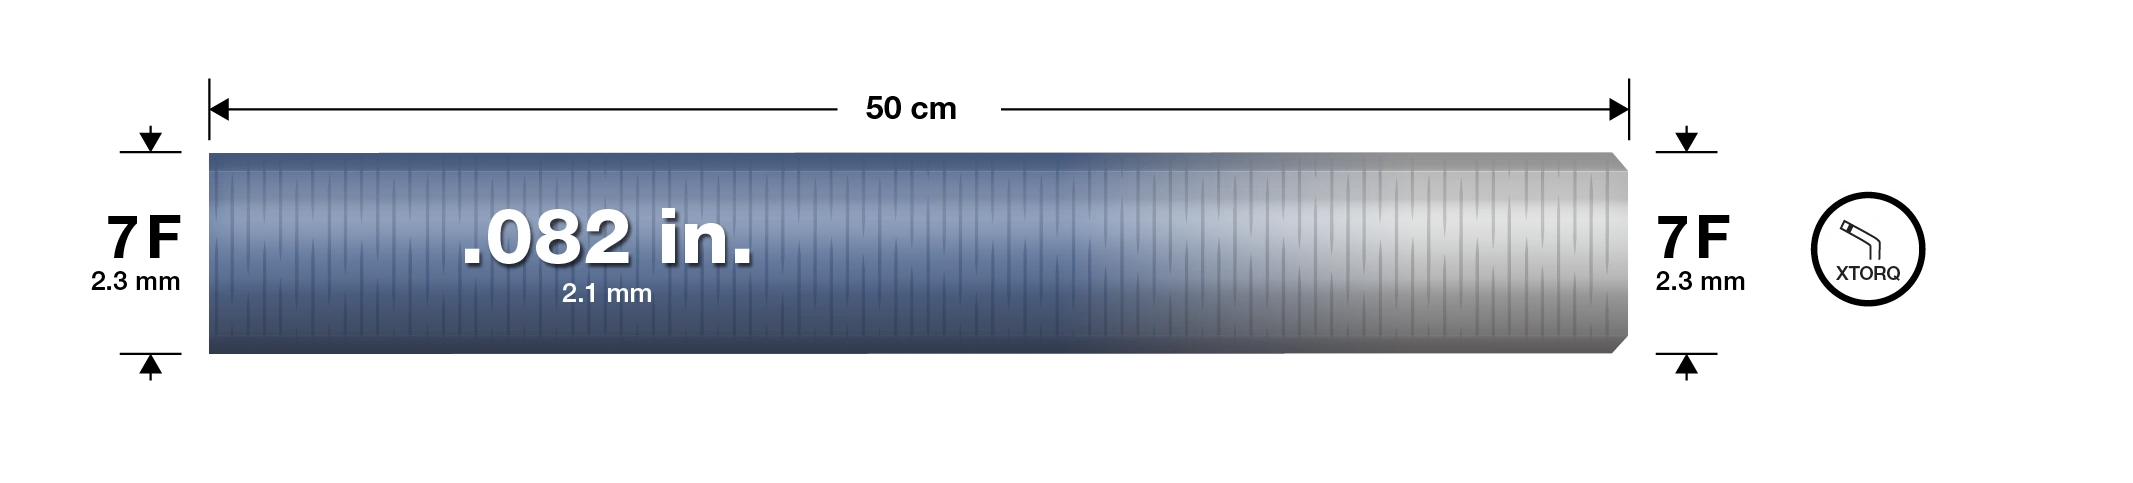 CAT7D Illustration of lengths, widths and specifications listed above